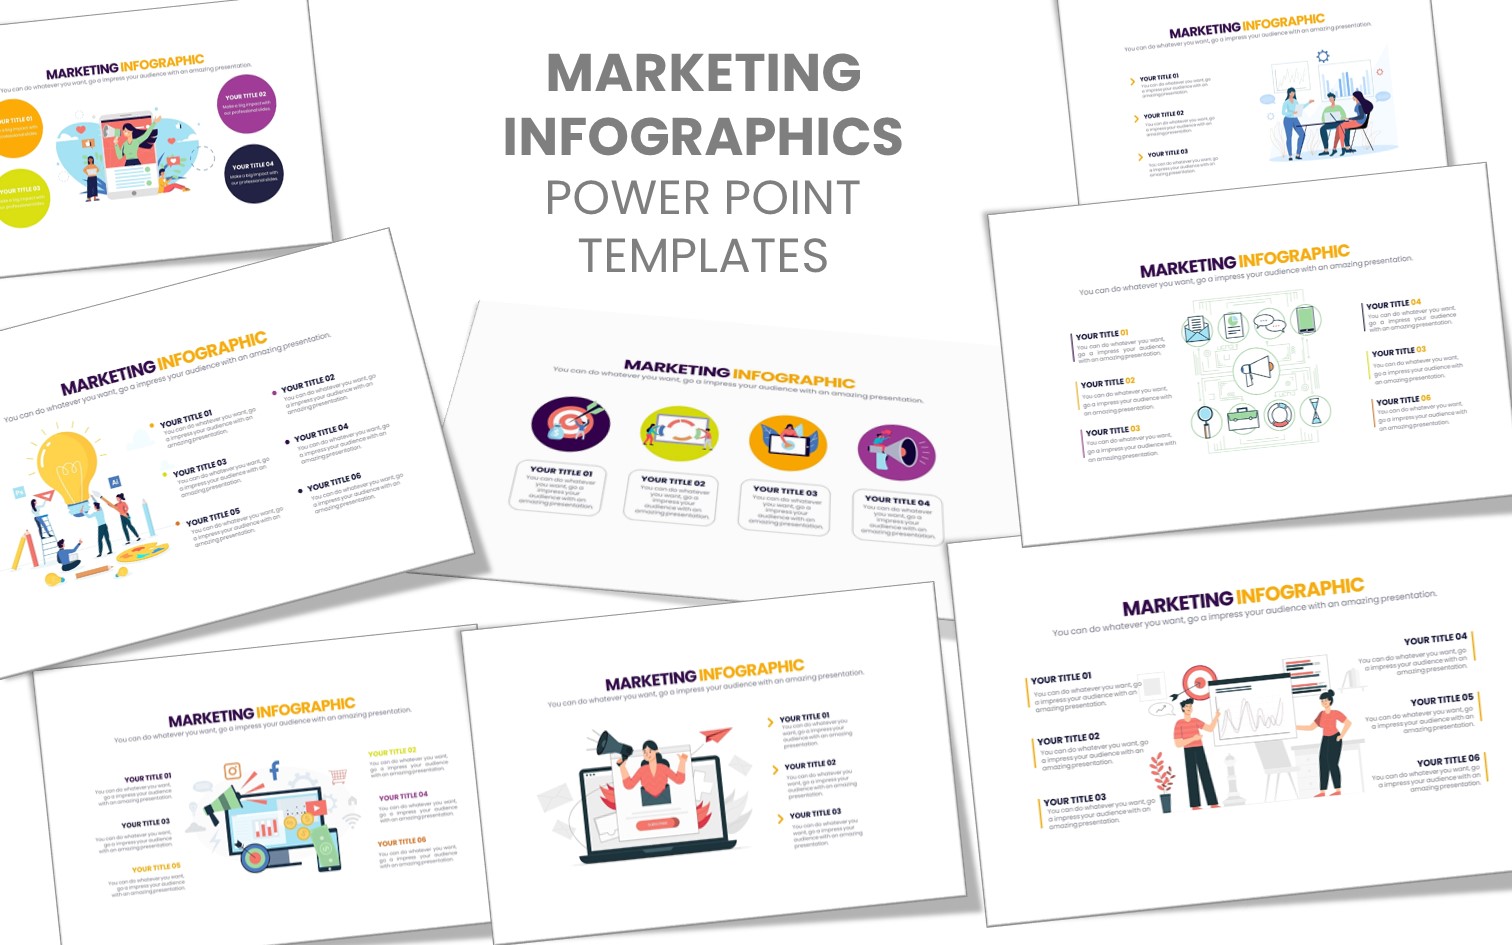 Business-Digital Marketing Infographic PowerPoint Templates